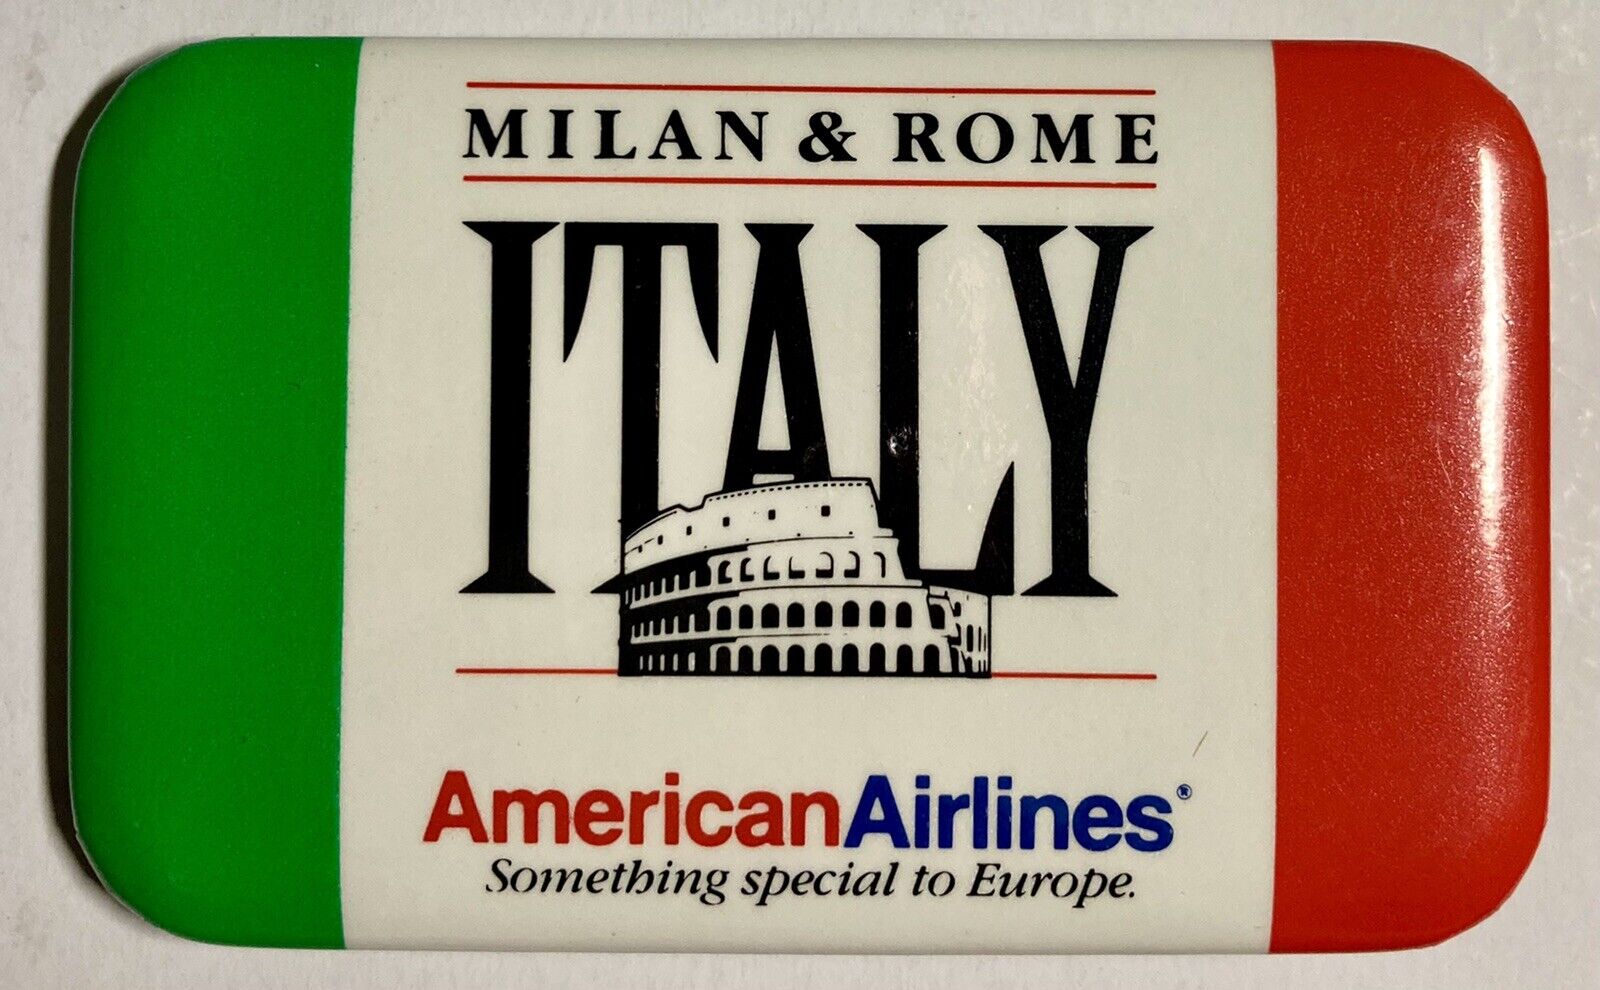 American Airlines Milan & Rome Italy Collectible Pin Button AA Pilot Flight